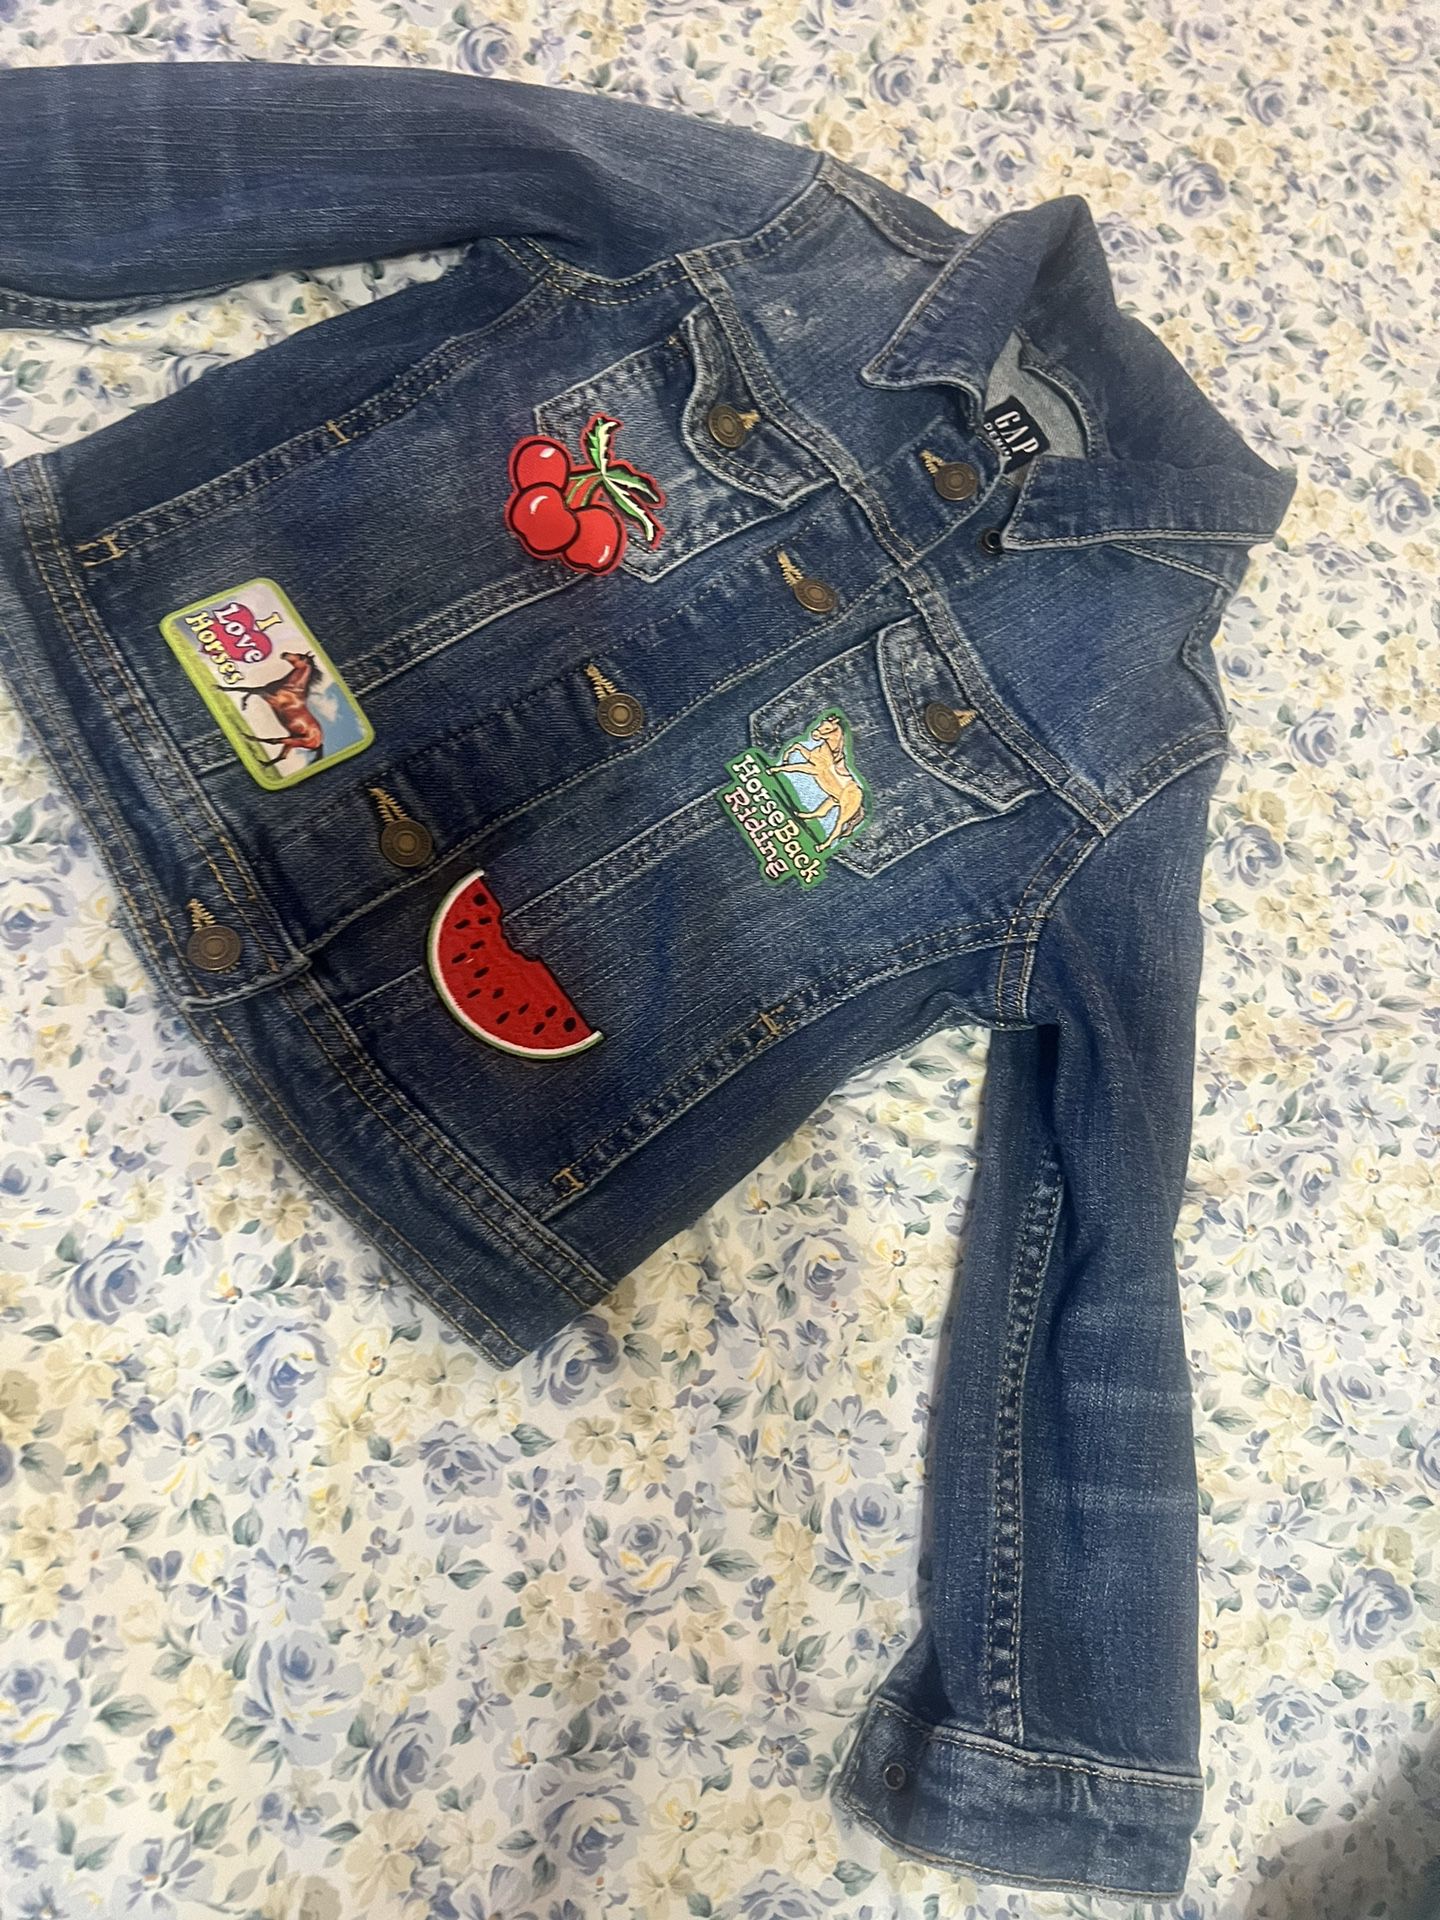 Jeans, jacket For Kids Girls Size Xs